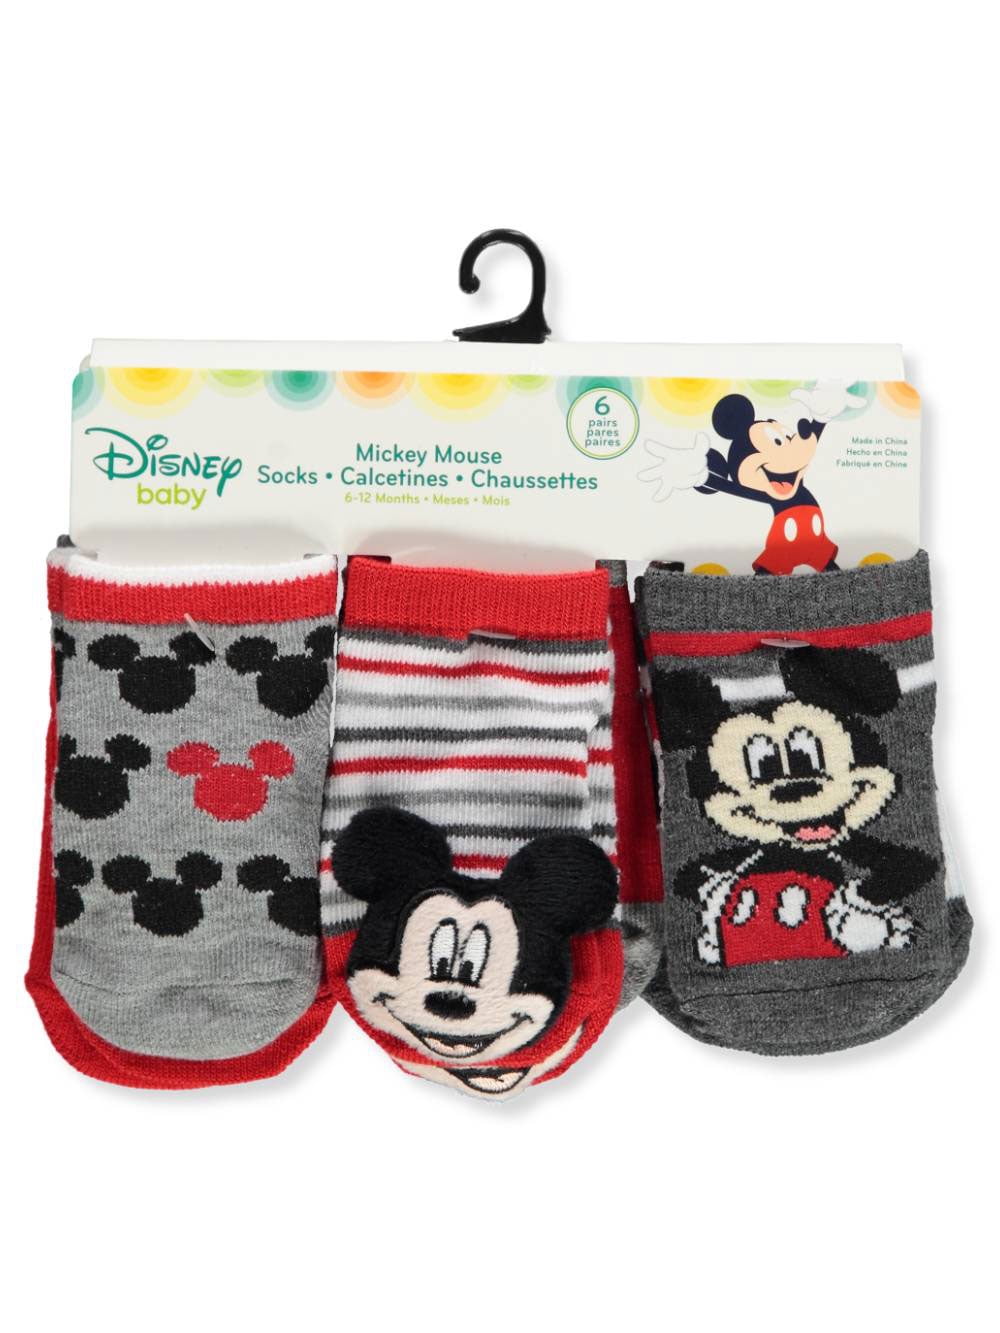 Official Disney Mickey & Minnie Mouse Licensed Boys Girls Crew Socks Set 3-Pack 70% Cotton Sizes from 6 Child